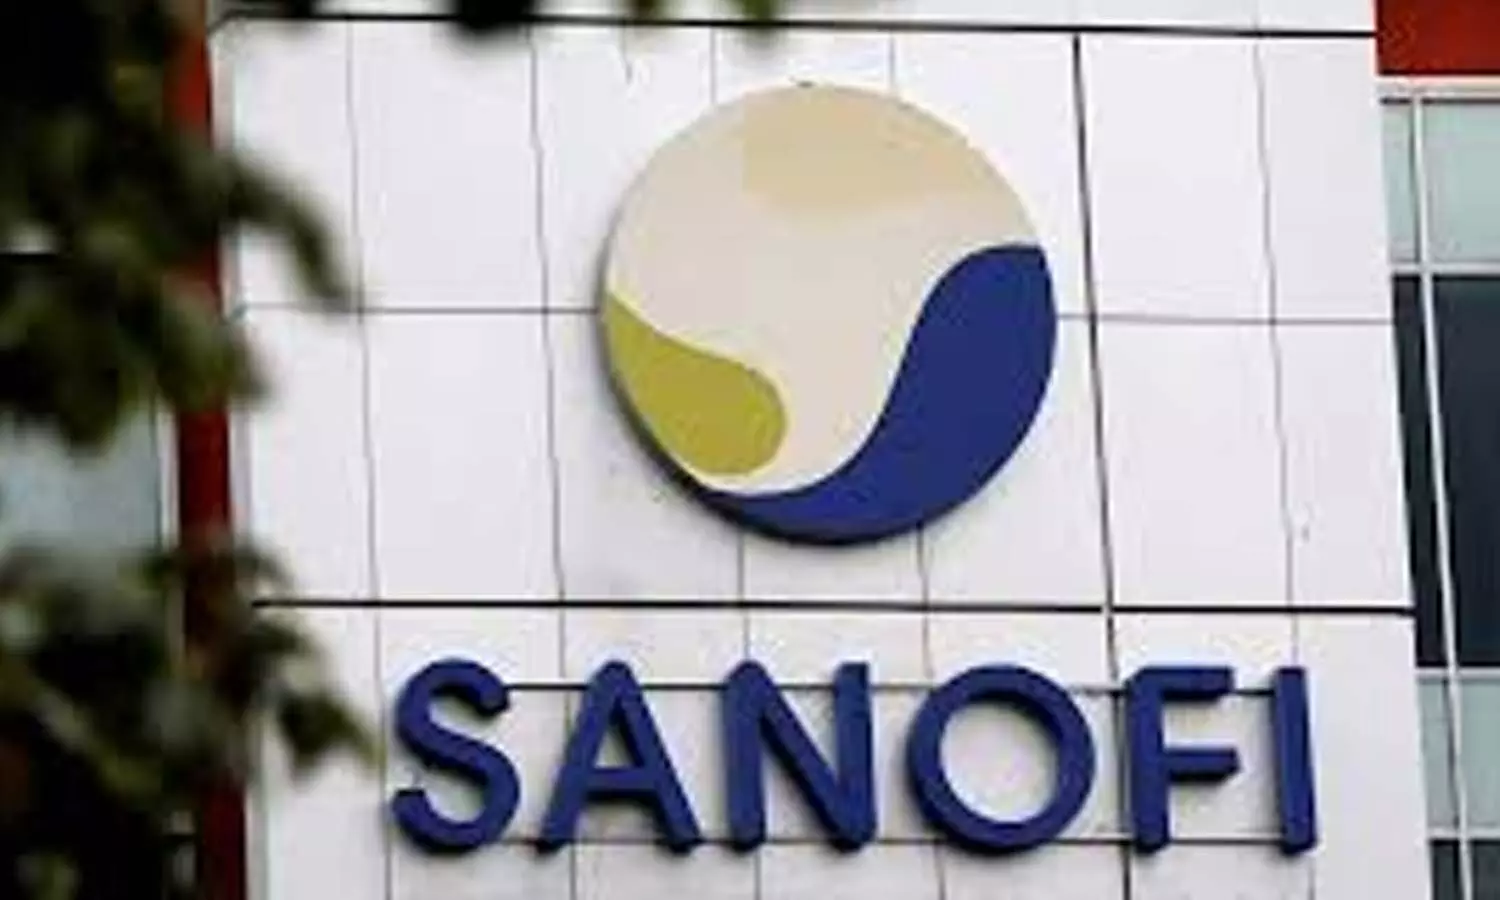 Dupixent met co-primary endpoints in Part A of Phase 3 trial: Regeneron, Sanofi